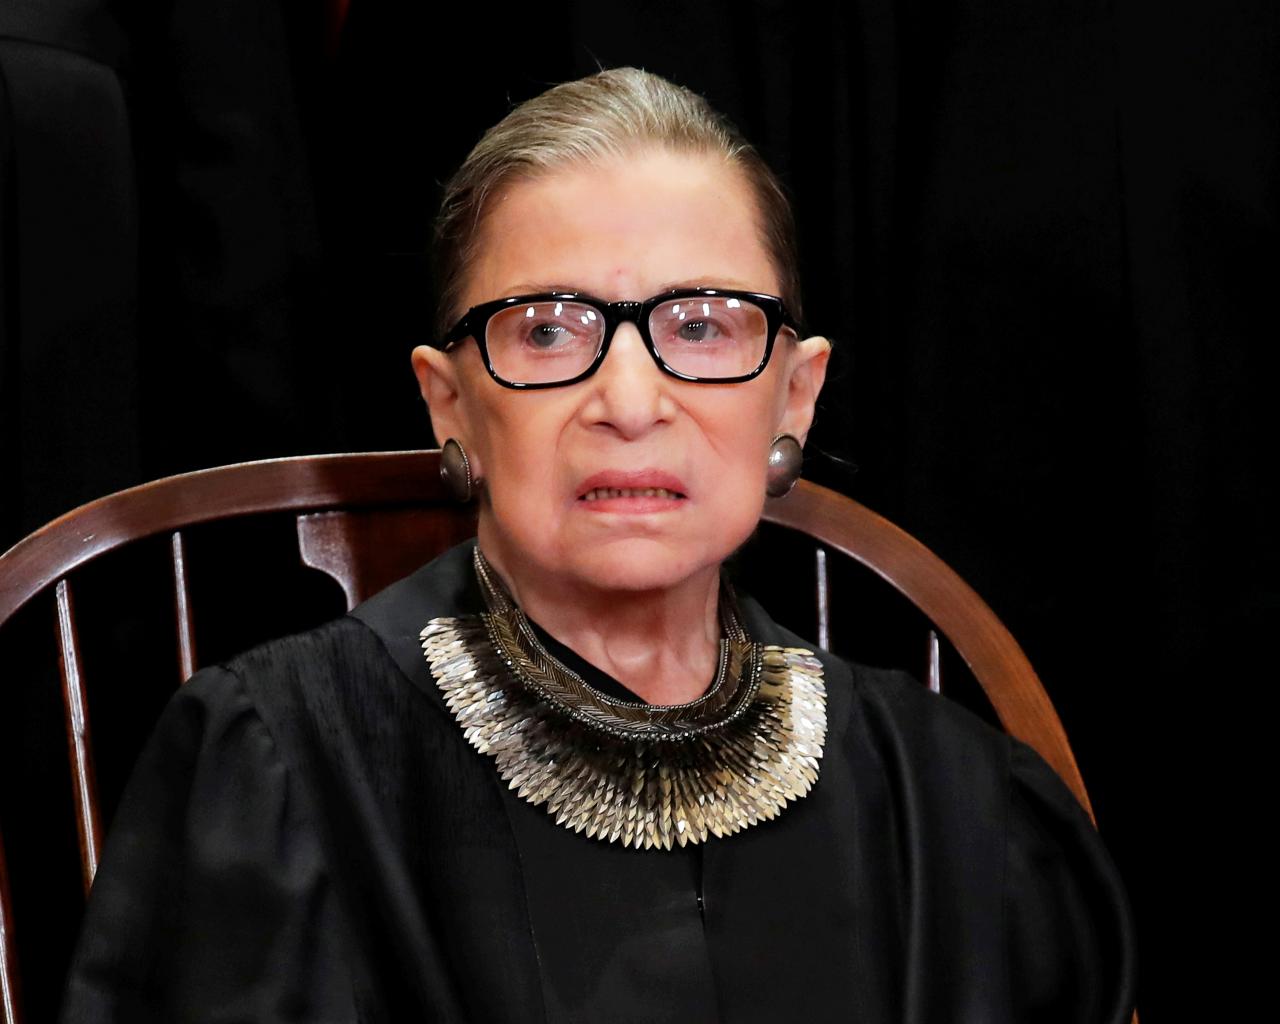 Biopic tells Justice Ginsburg's story long before 'Notorious RBG'